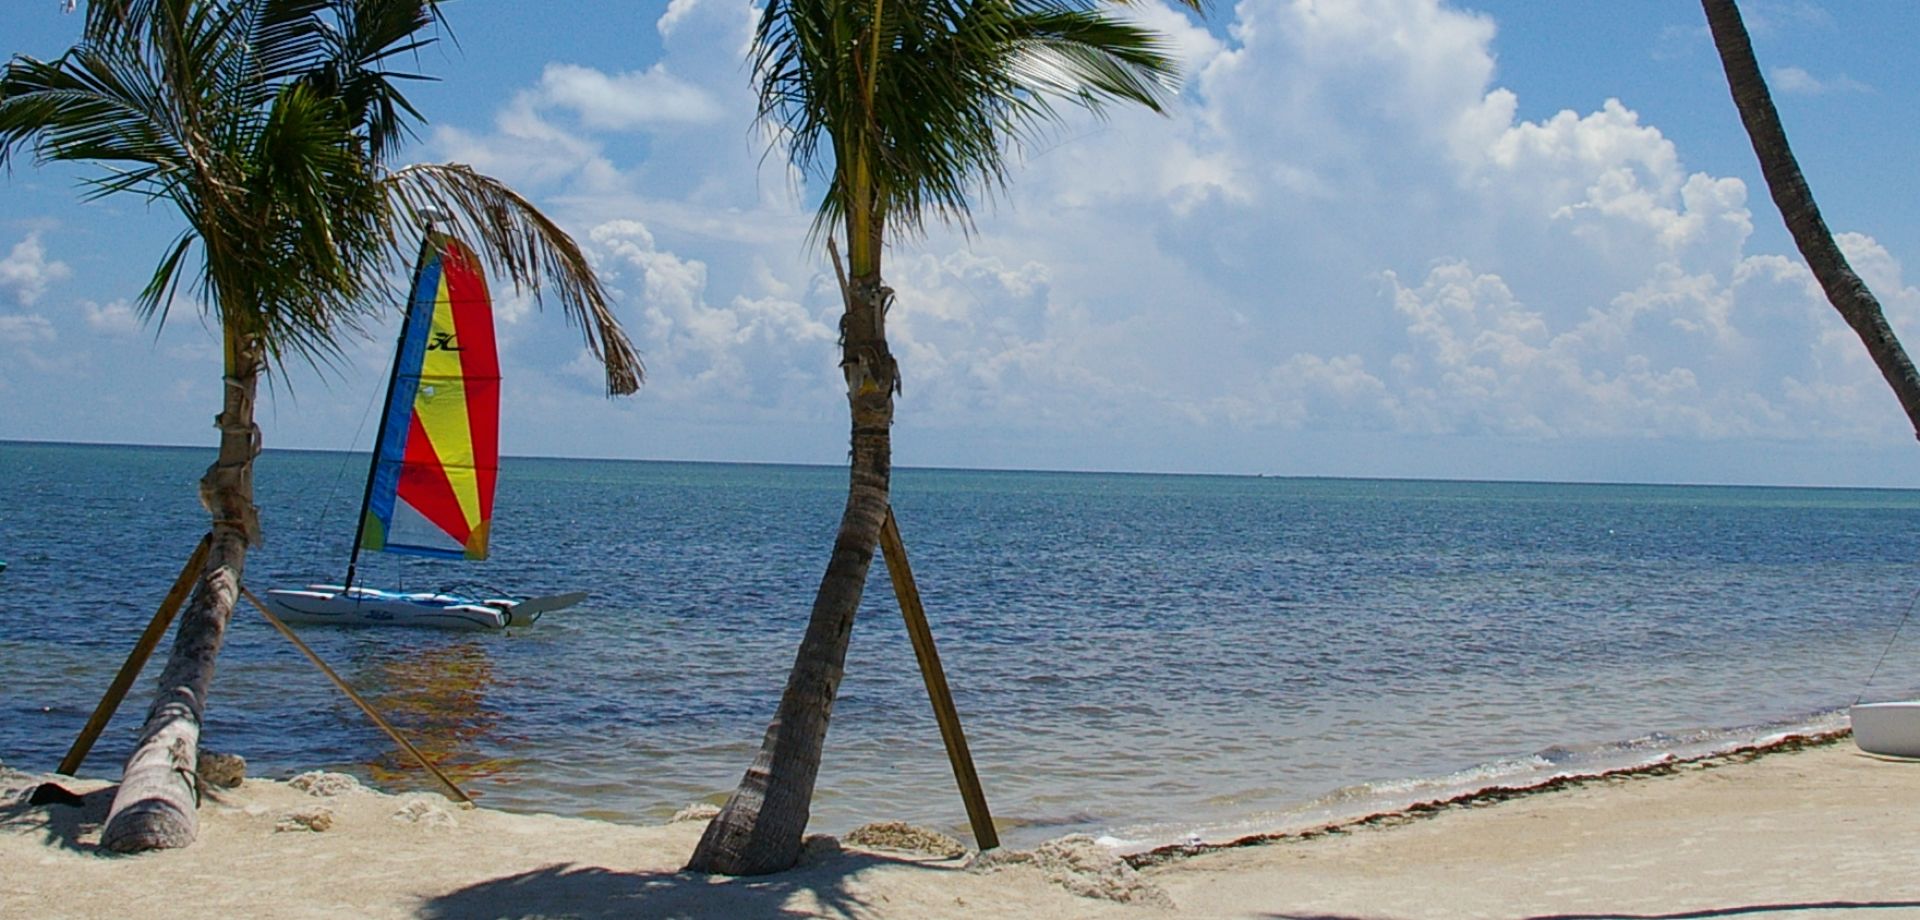 A Group Of Palm Trees On A Beach Near A Body Of Water